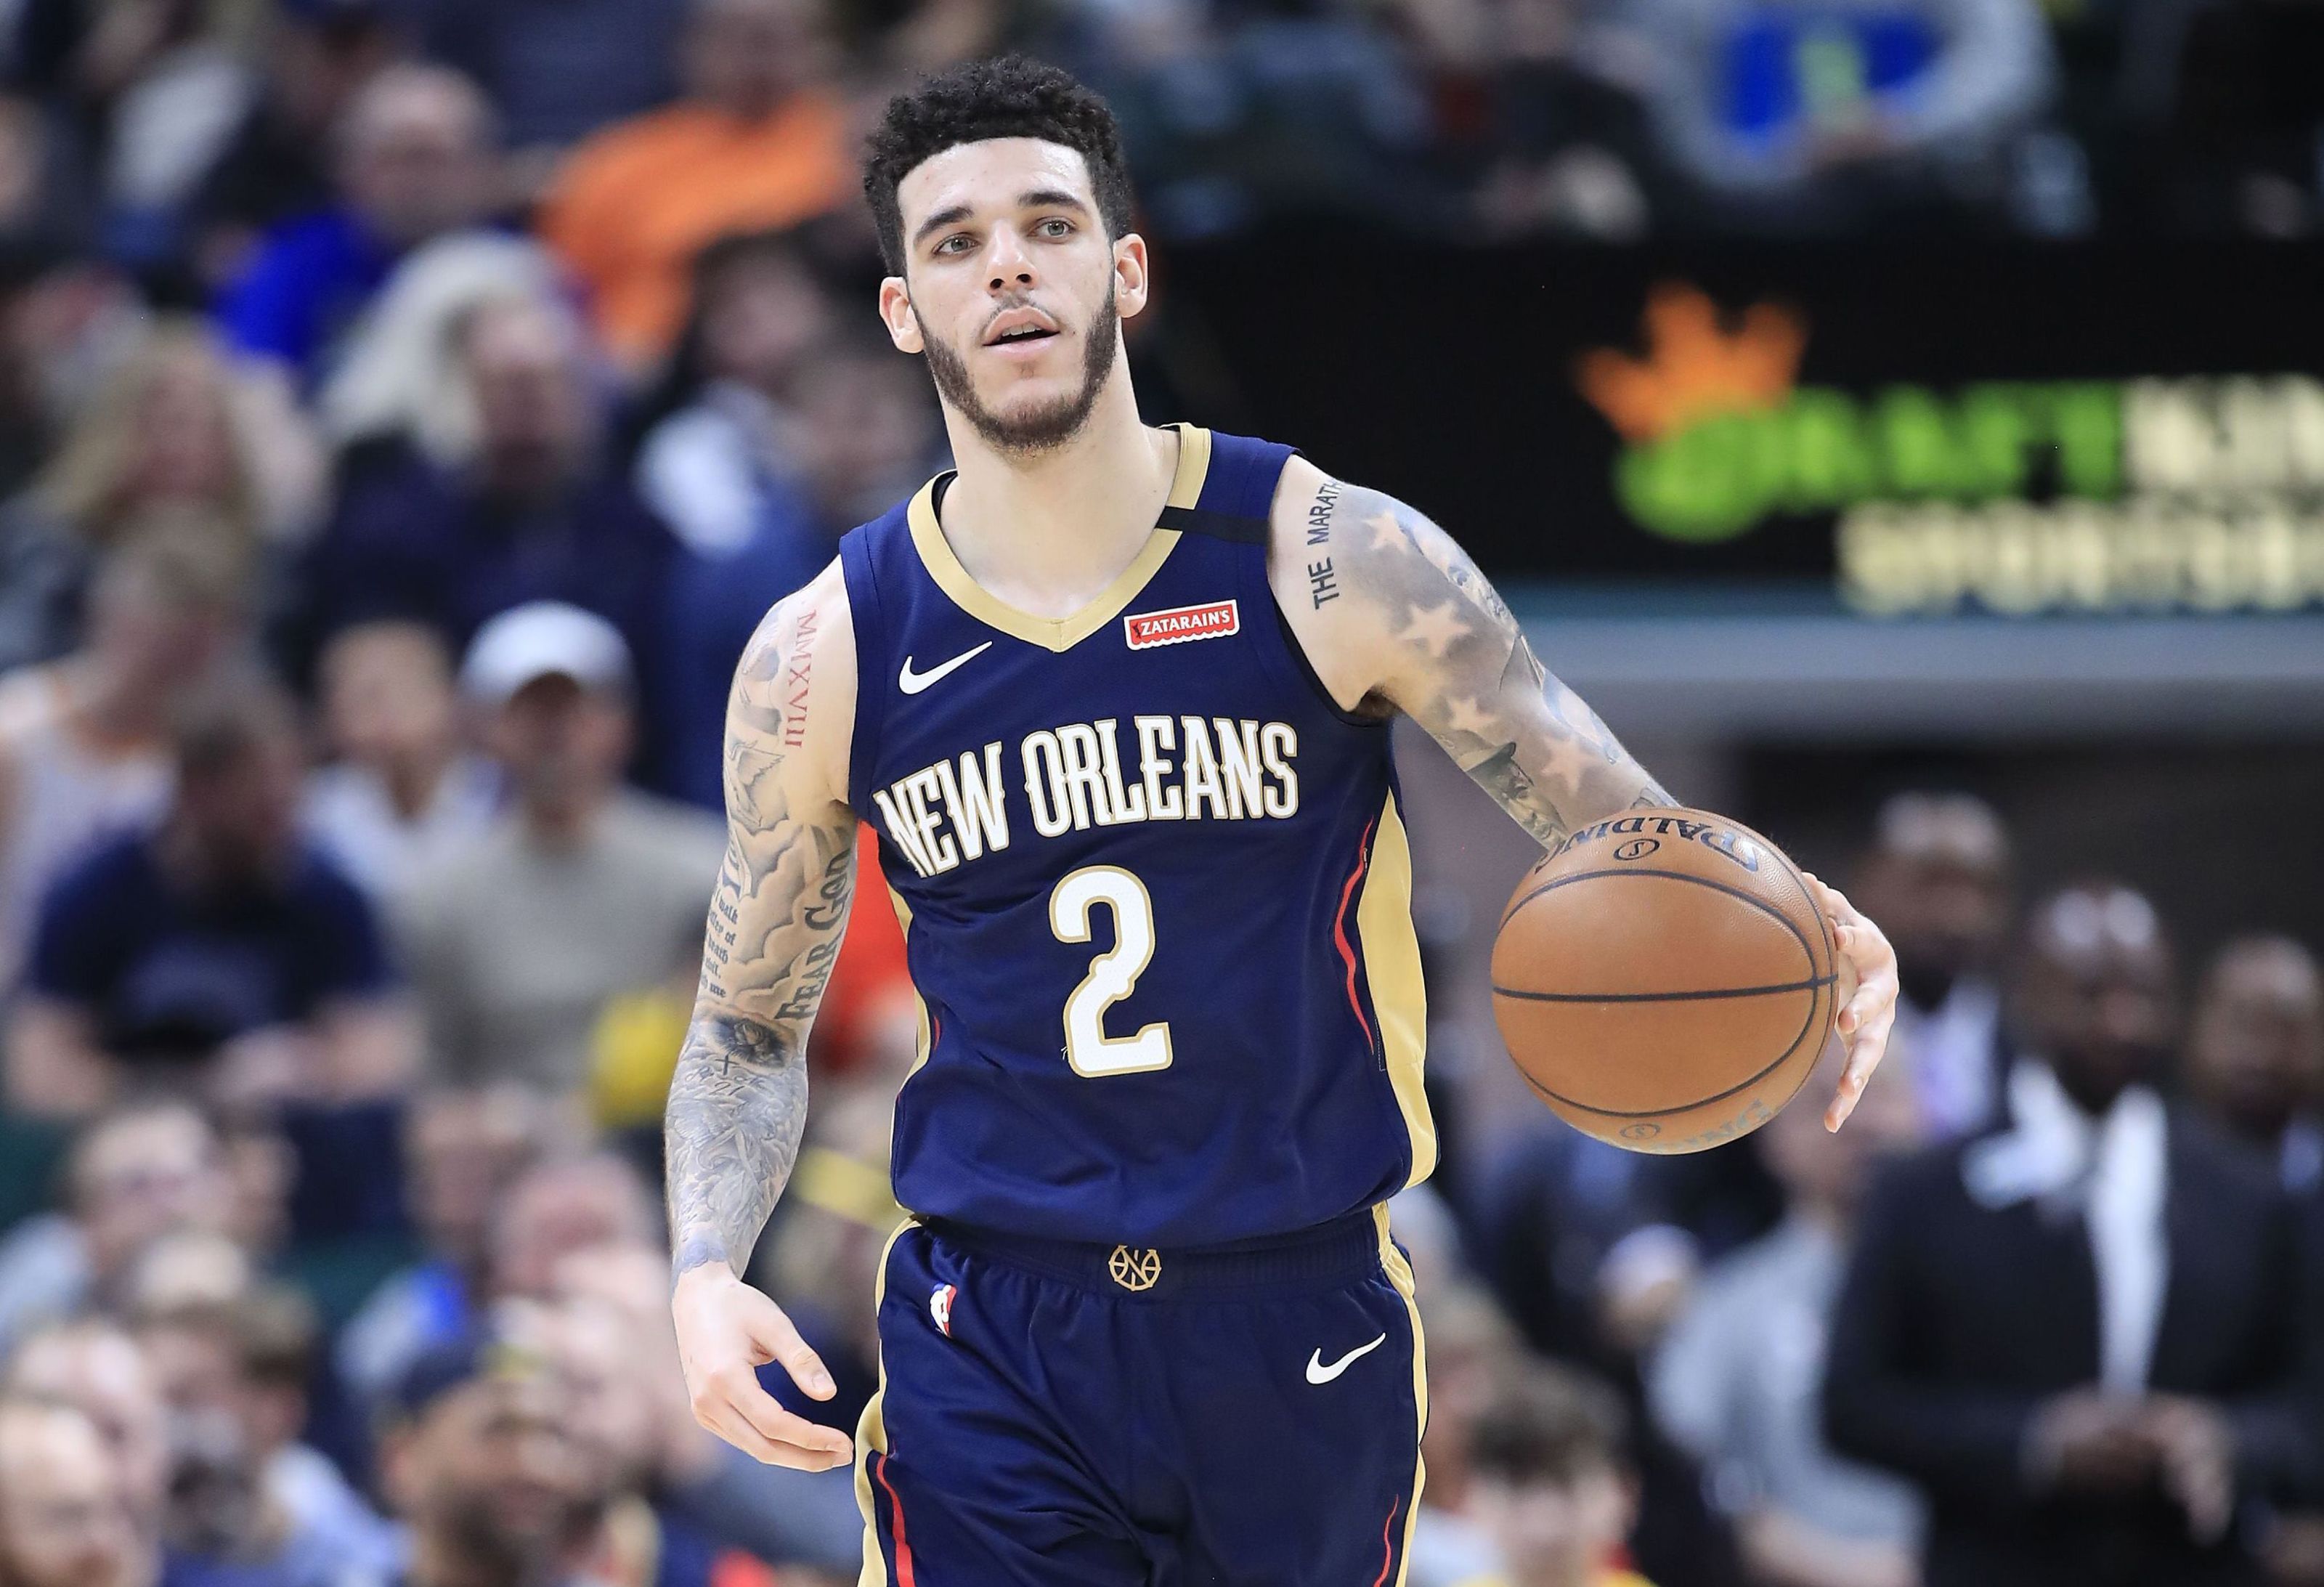 New Orleans Pelicans: Lonzo Ball's Future Is Now In the Air